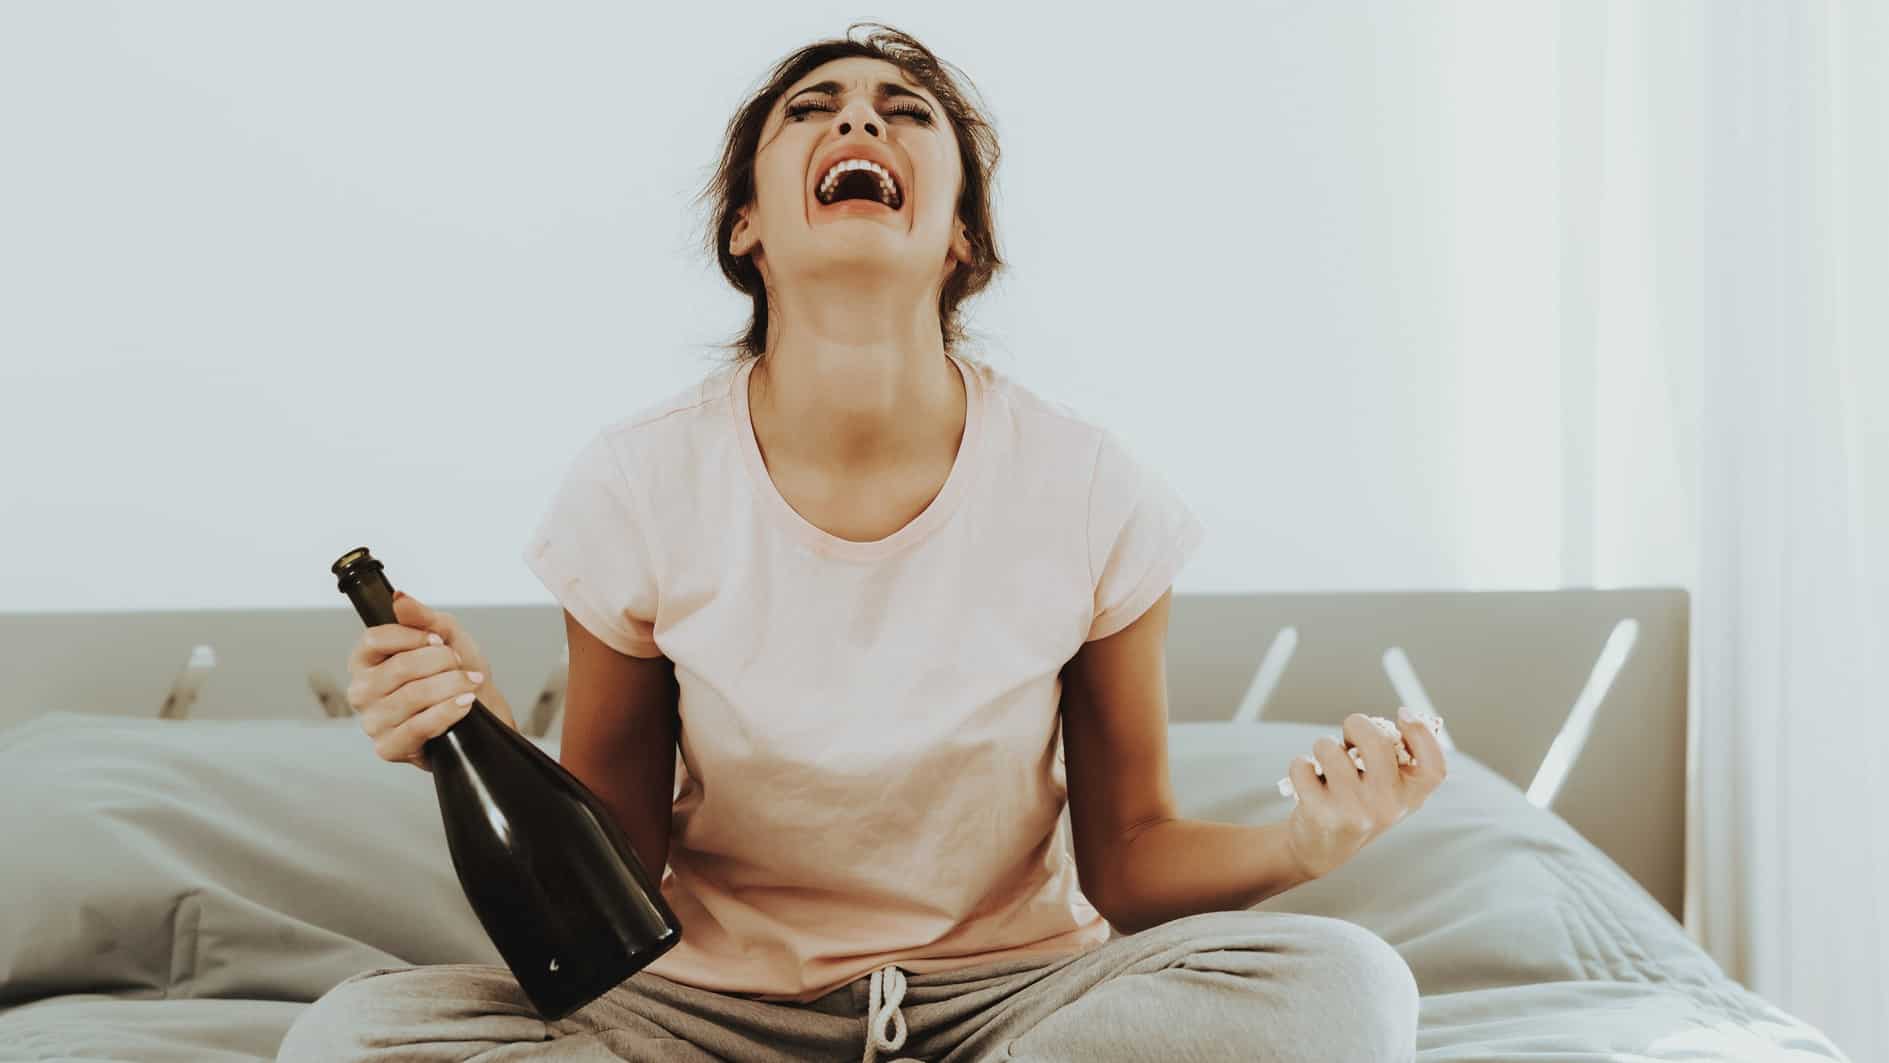 Crying Woman Sits On Bed With Bottle Of Champagne.